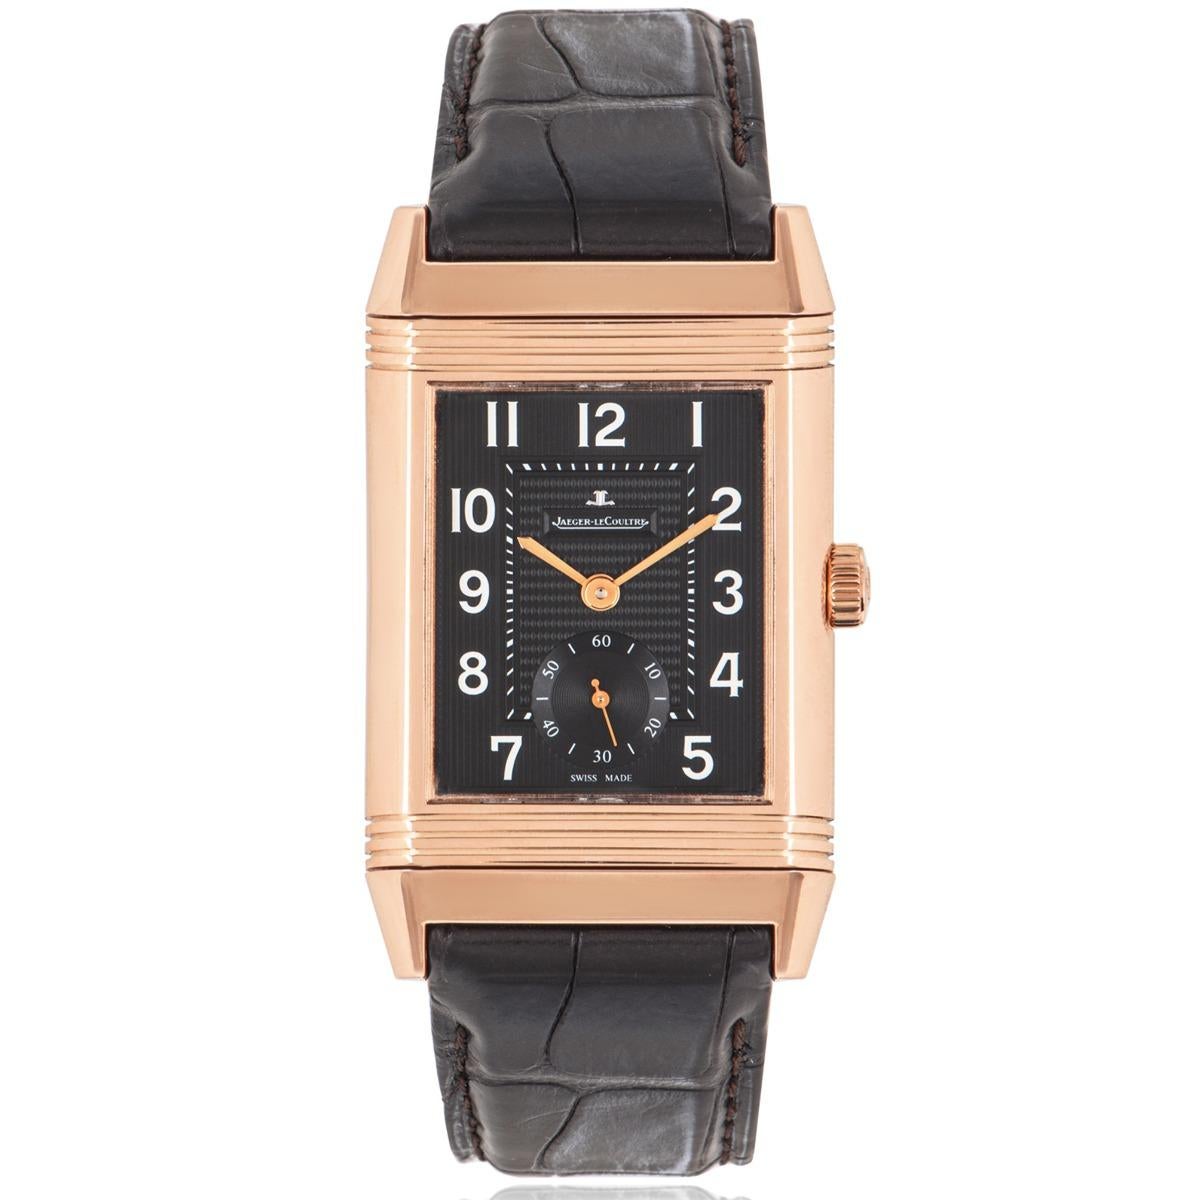 A limited edition 30mm Reverso Grande in rose gold from Jaeger LeCoultre. Starting in 2000, Jaeger started to collaborate with Portuguese artists with the aim of turning timepieces into timeless pieces of art. The initiative was started by Pedro